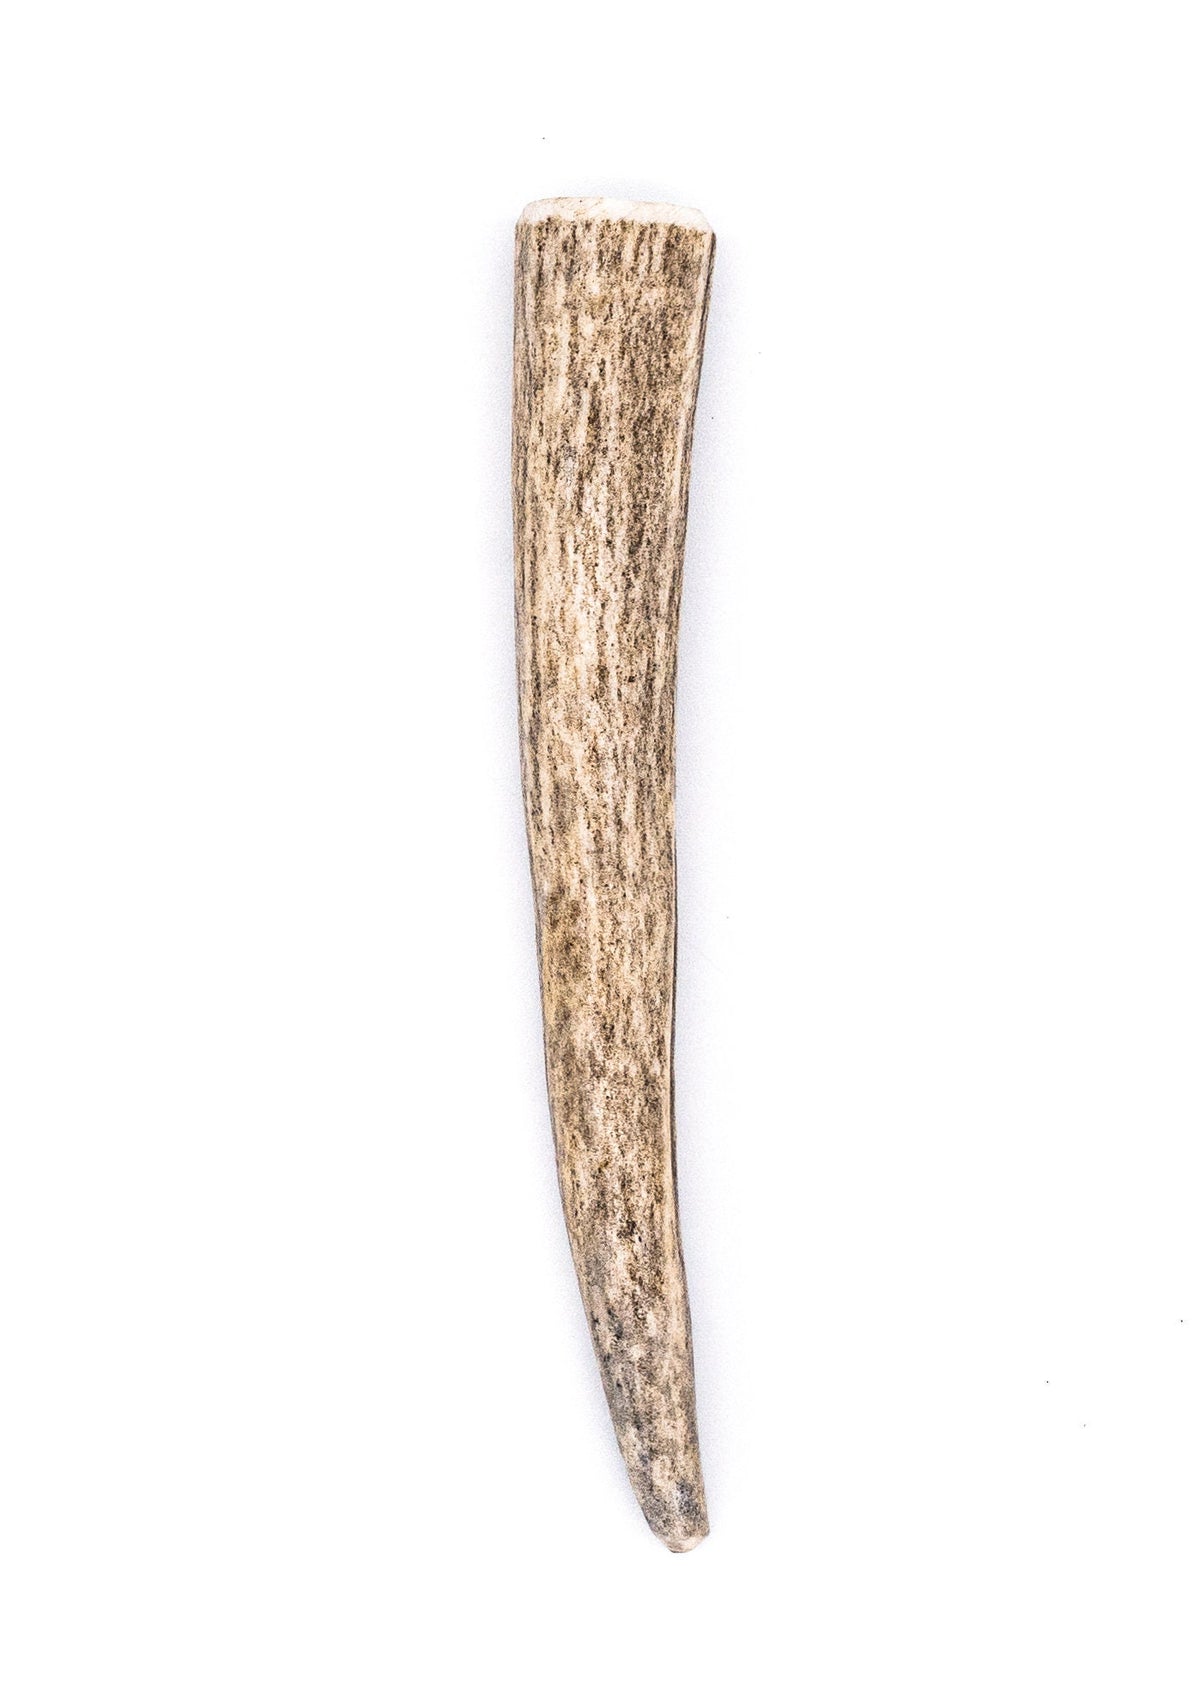 Deer Antler Dog Chews 2 ct- All Natural, Grade A, Premium Antler Dog Treats, Organic Dog Chews, Naturally Shed Antlers from USA